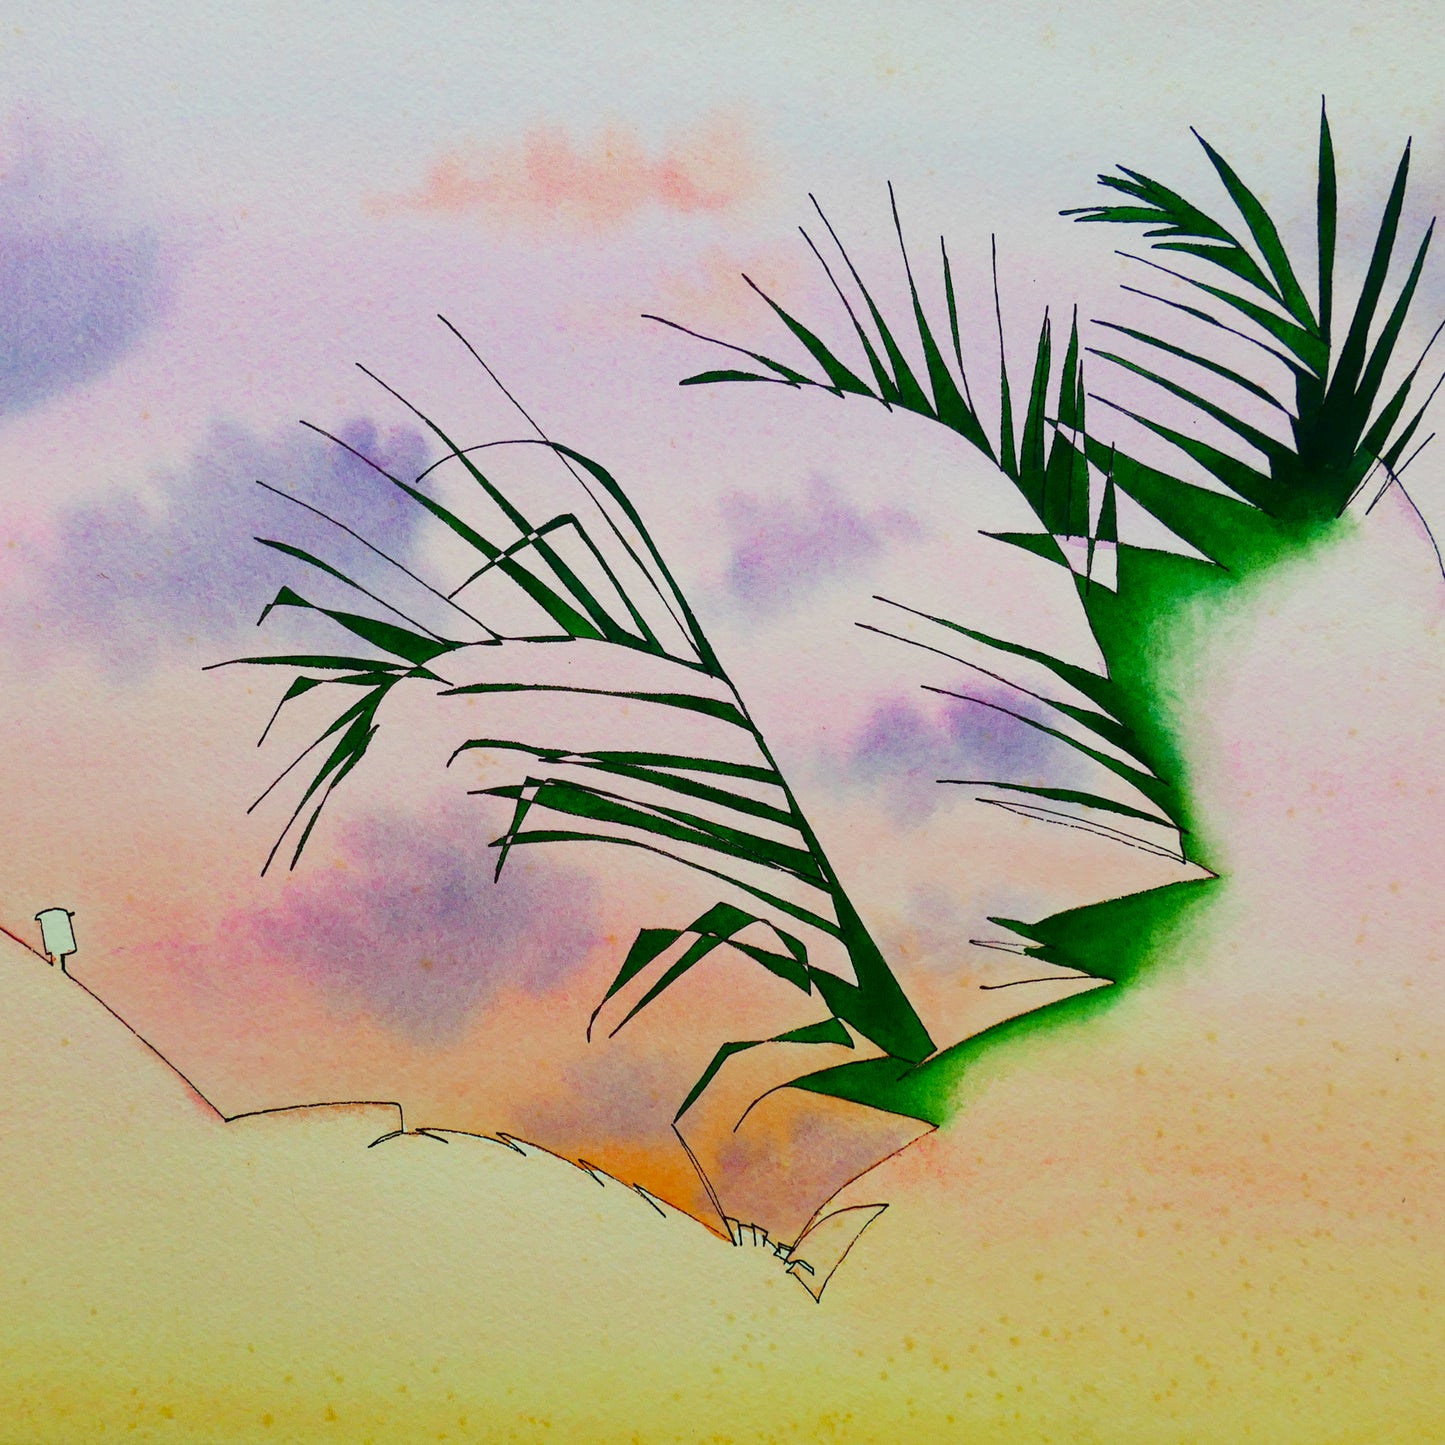 Watercolor + Ink on Paper - Dusk in the Subtropics